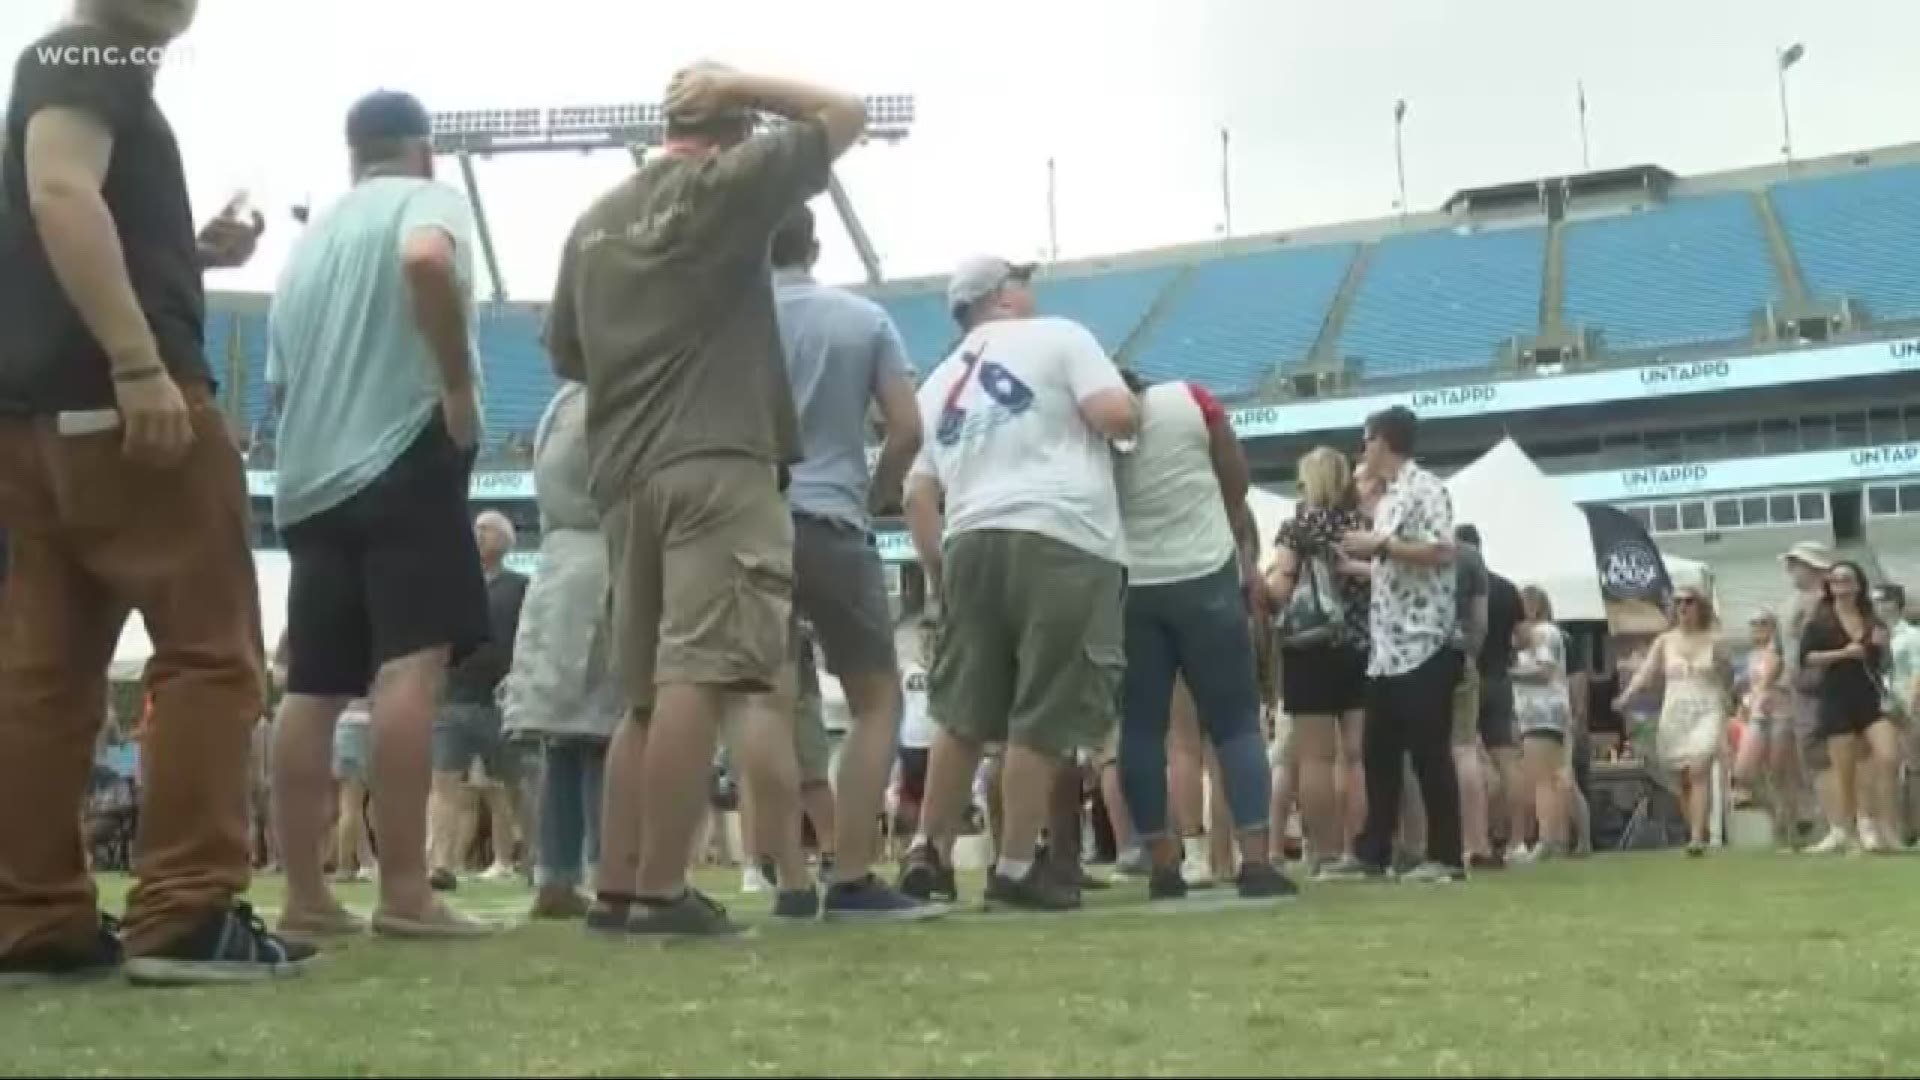 It was supposed to be a fun Saturday afternoon for thousands of people who turned out for the first Untappd Beer Festival at Bank of America Stadium.